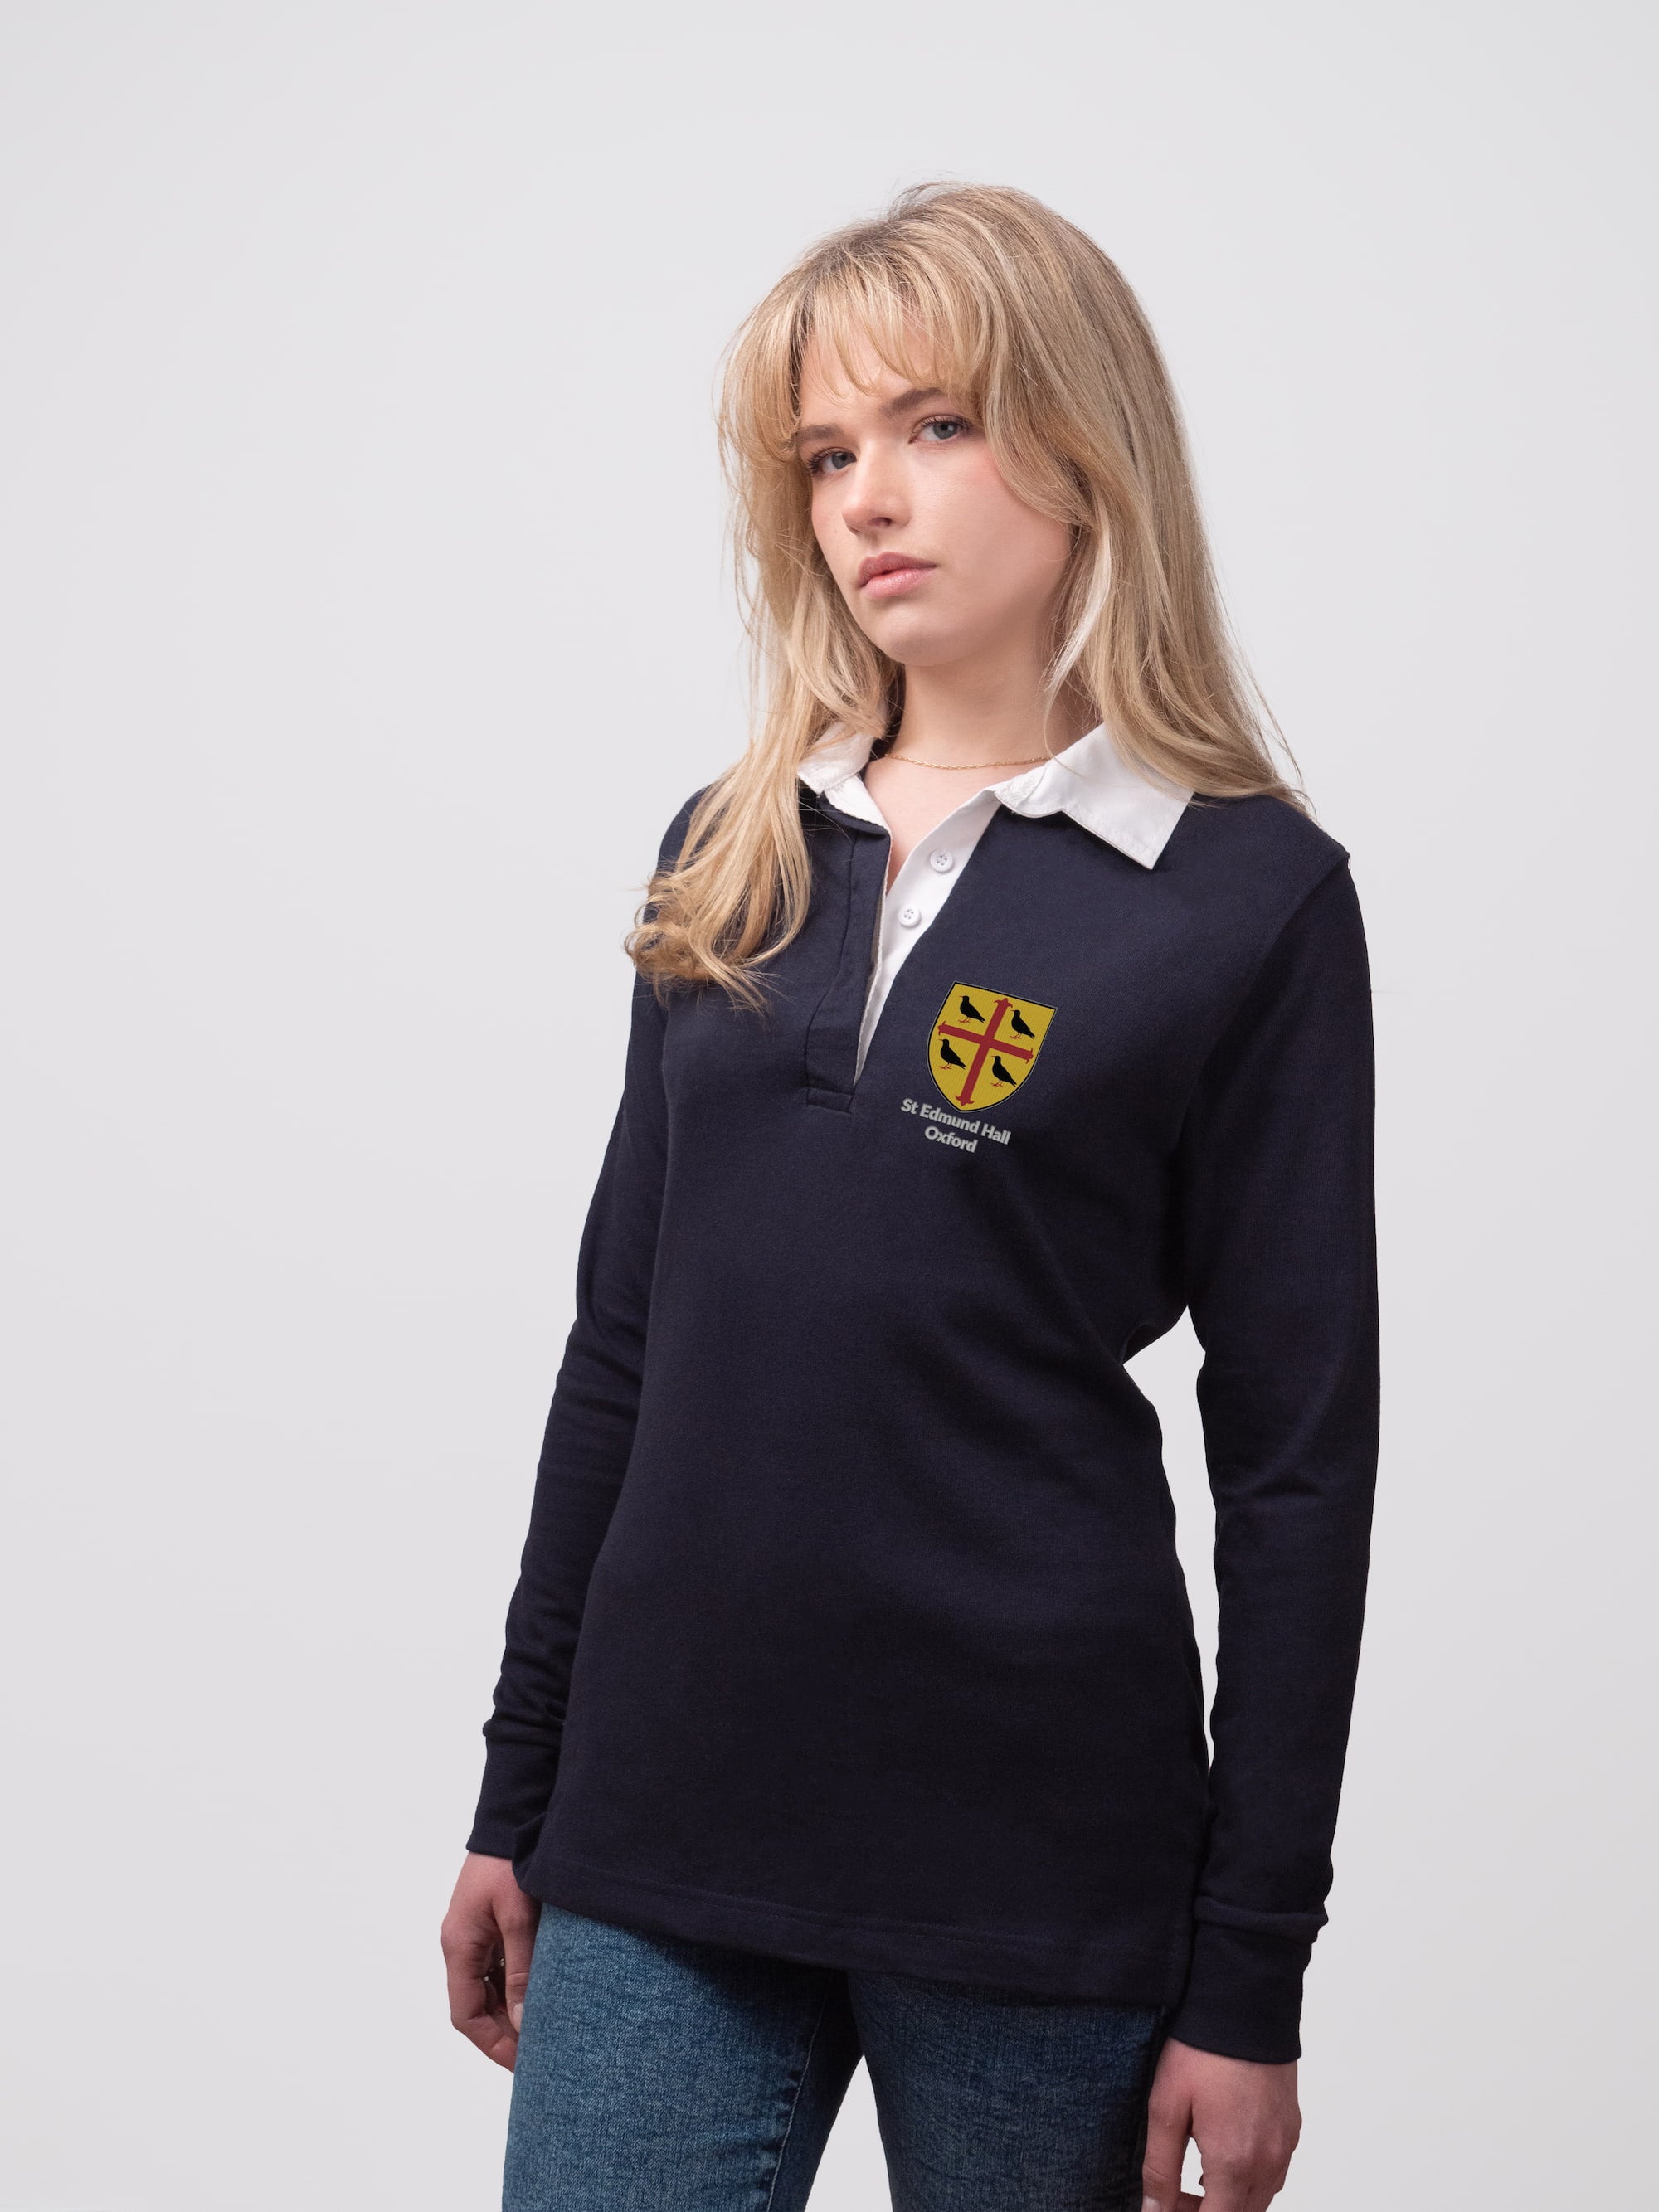 Student wearing a navy St Edmund Hall College rugby shirt with embroidered crest